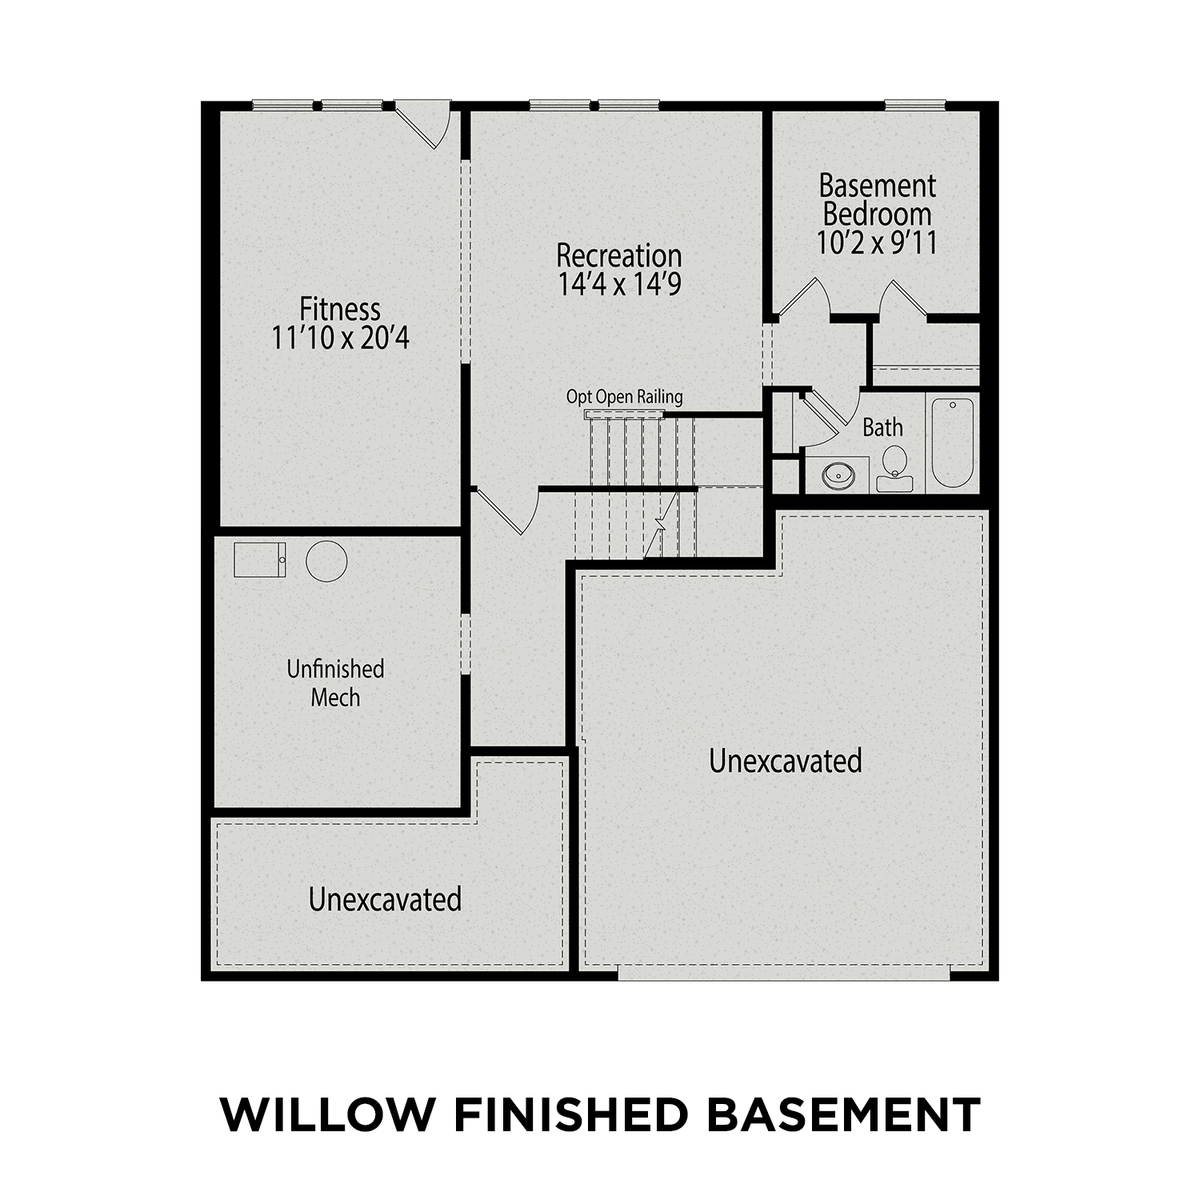 3 - The Willow E floor plan layout for 500 Craftsman Ridge Trail in Davidson Homes' Glenmere community.